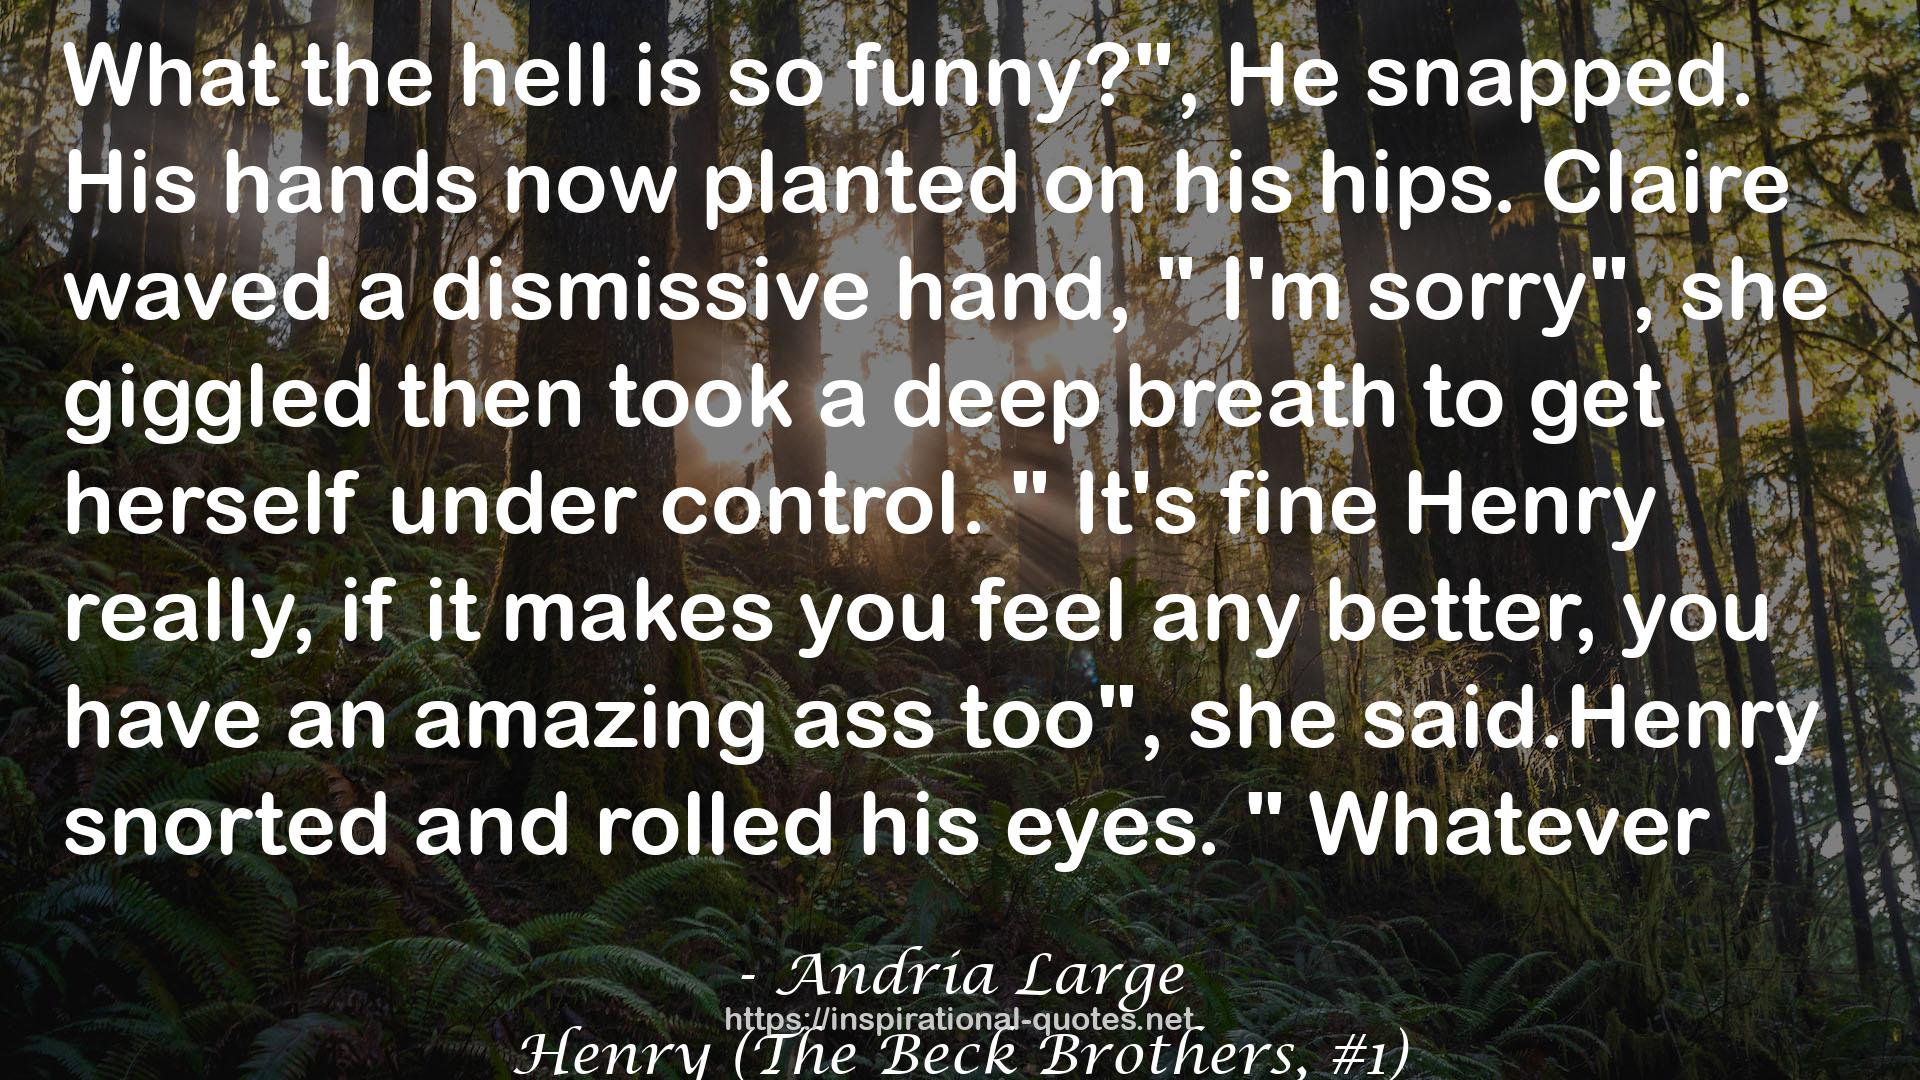 Henry (The Beck Brothers, #1) QUOTES